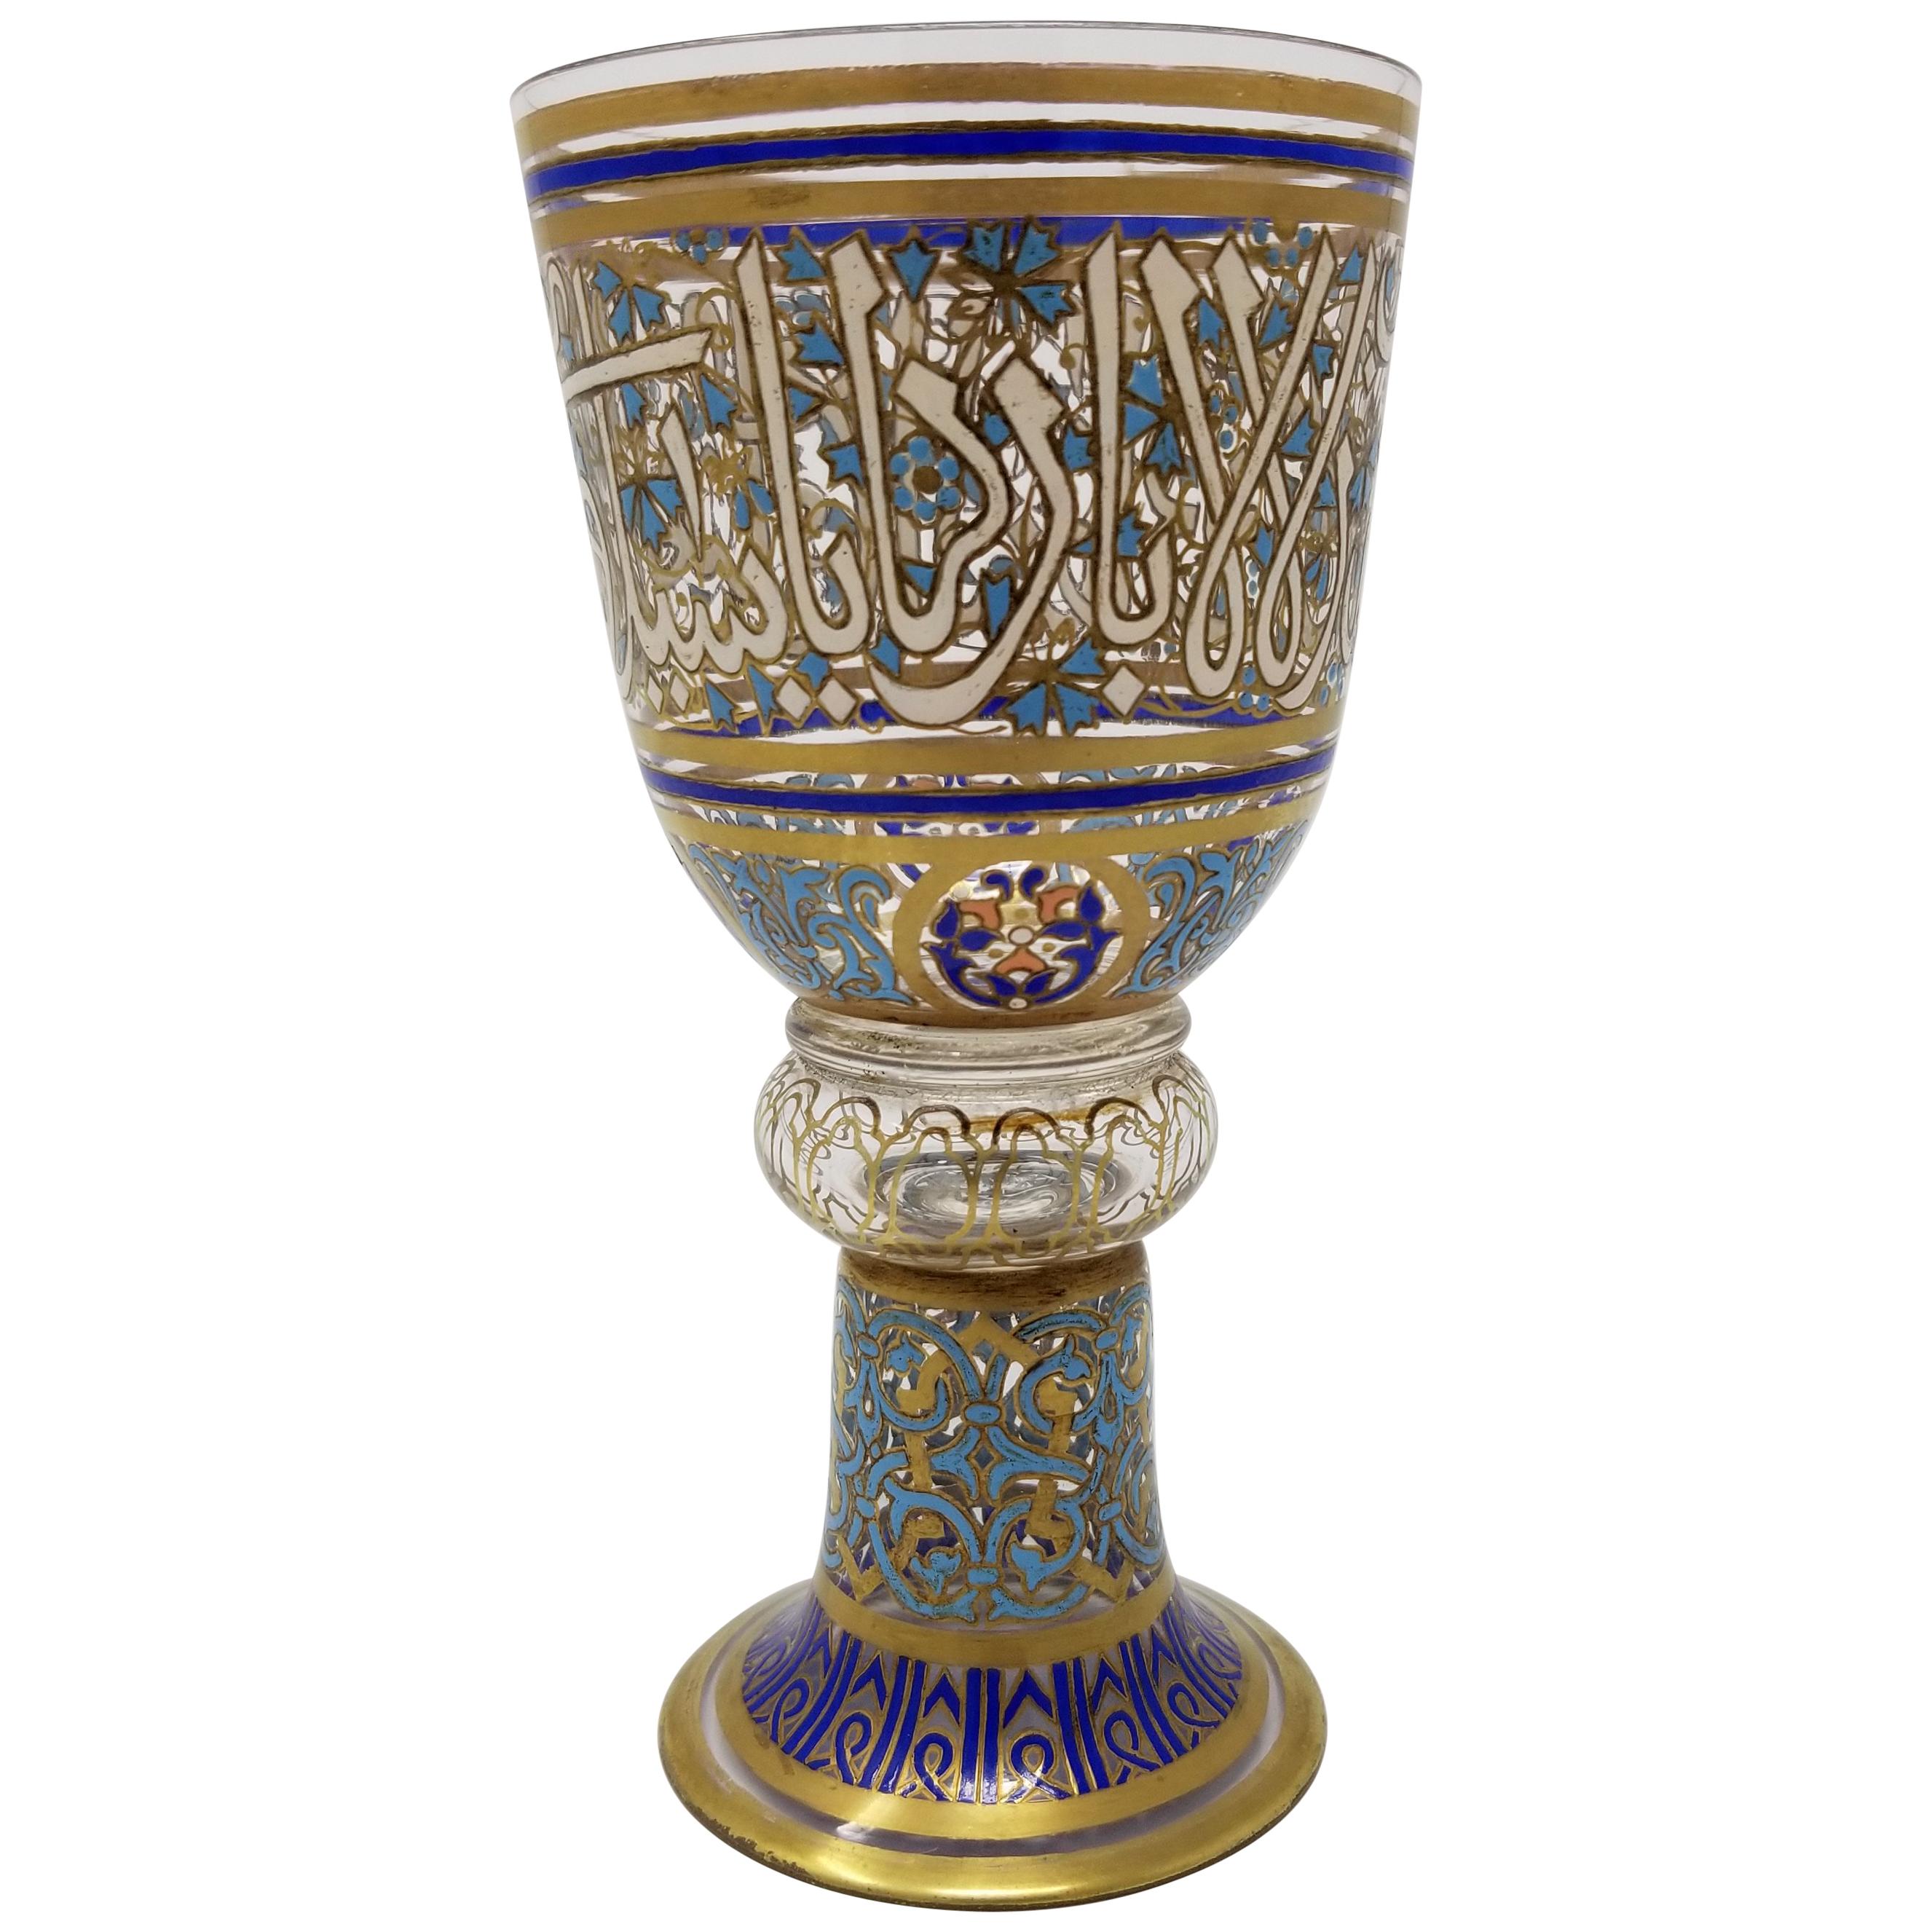 Antique Lobmeyr Ottoman Gilt and Enameled Glass Goblet with Islamic Calligraphy